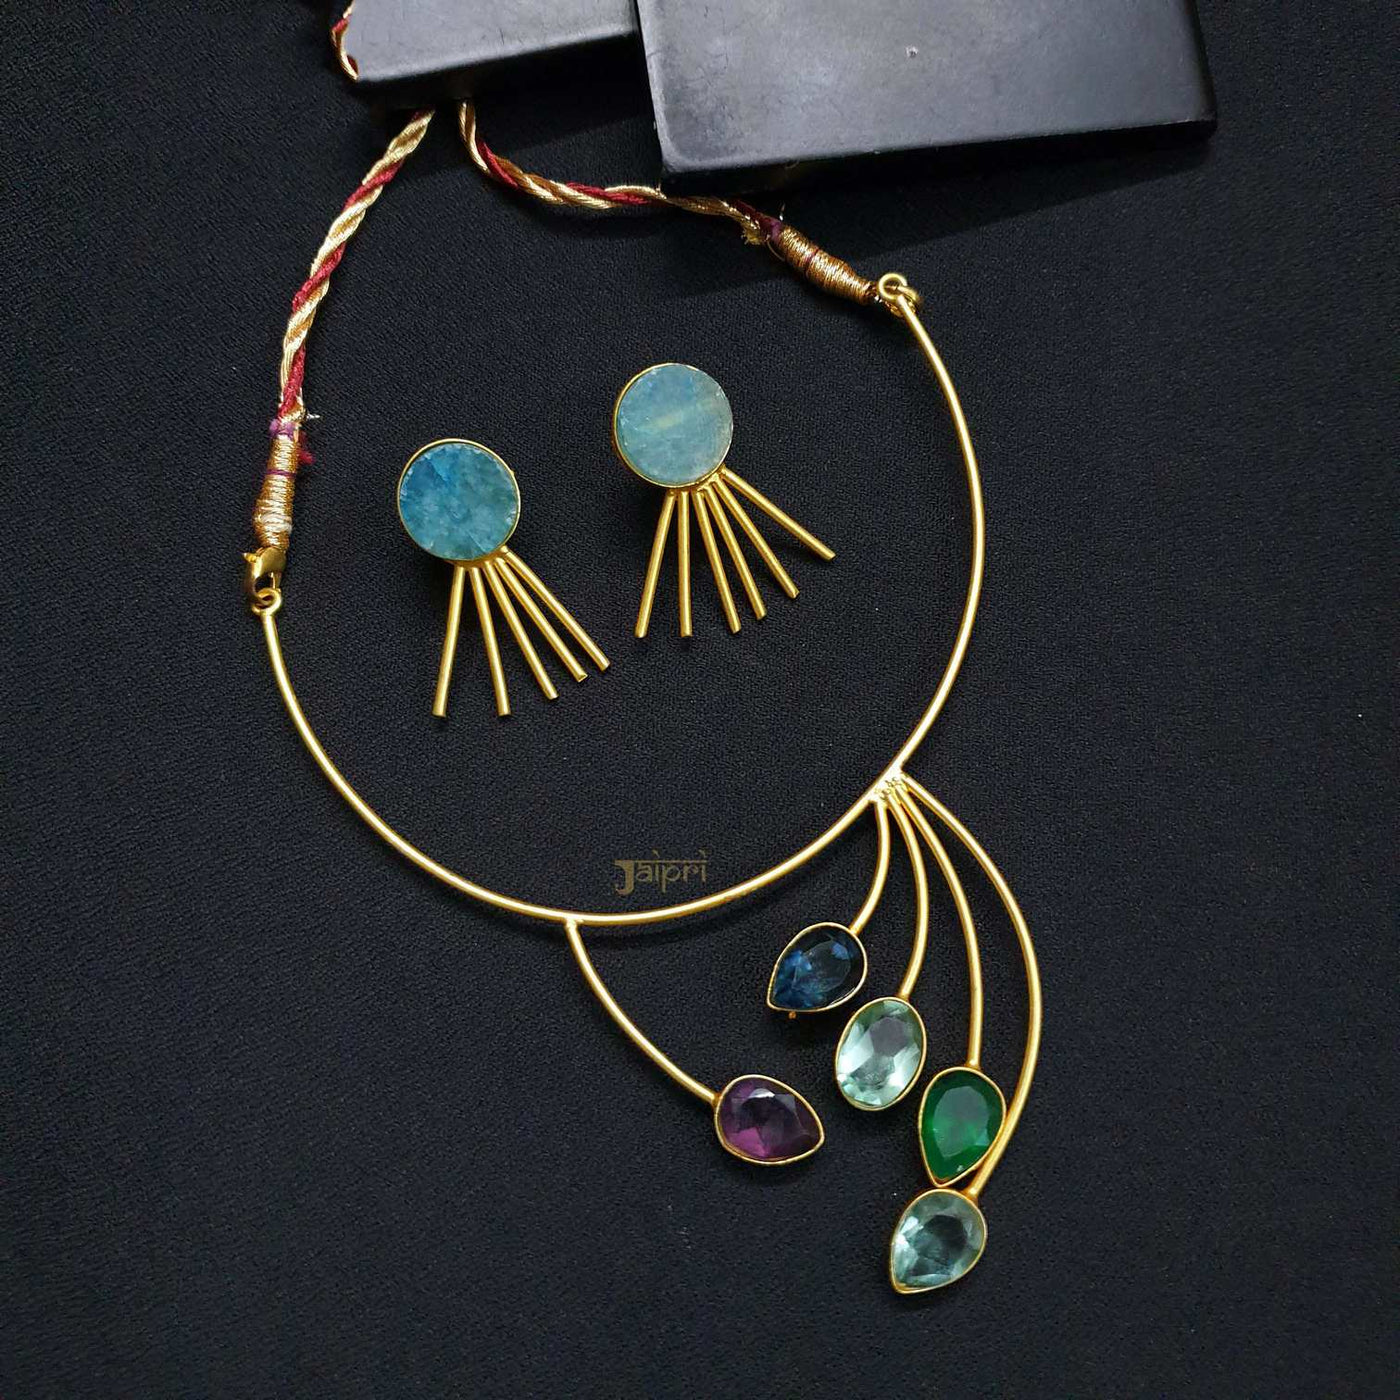 Adorable Multicolor Stone Gold Necklace With Earrings